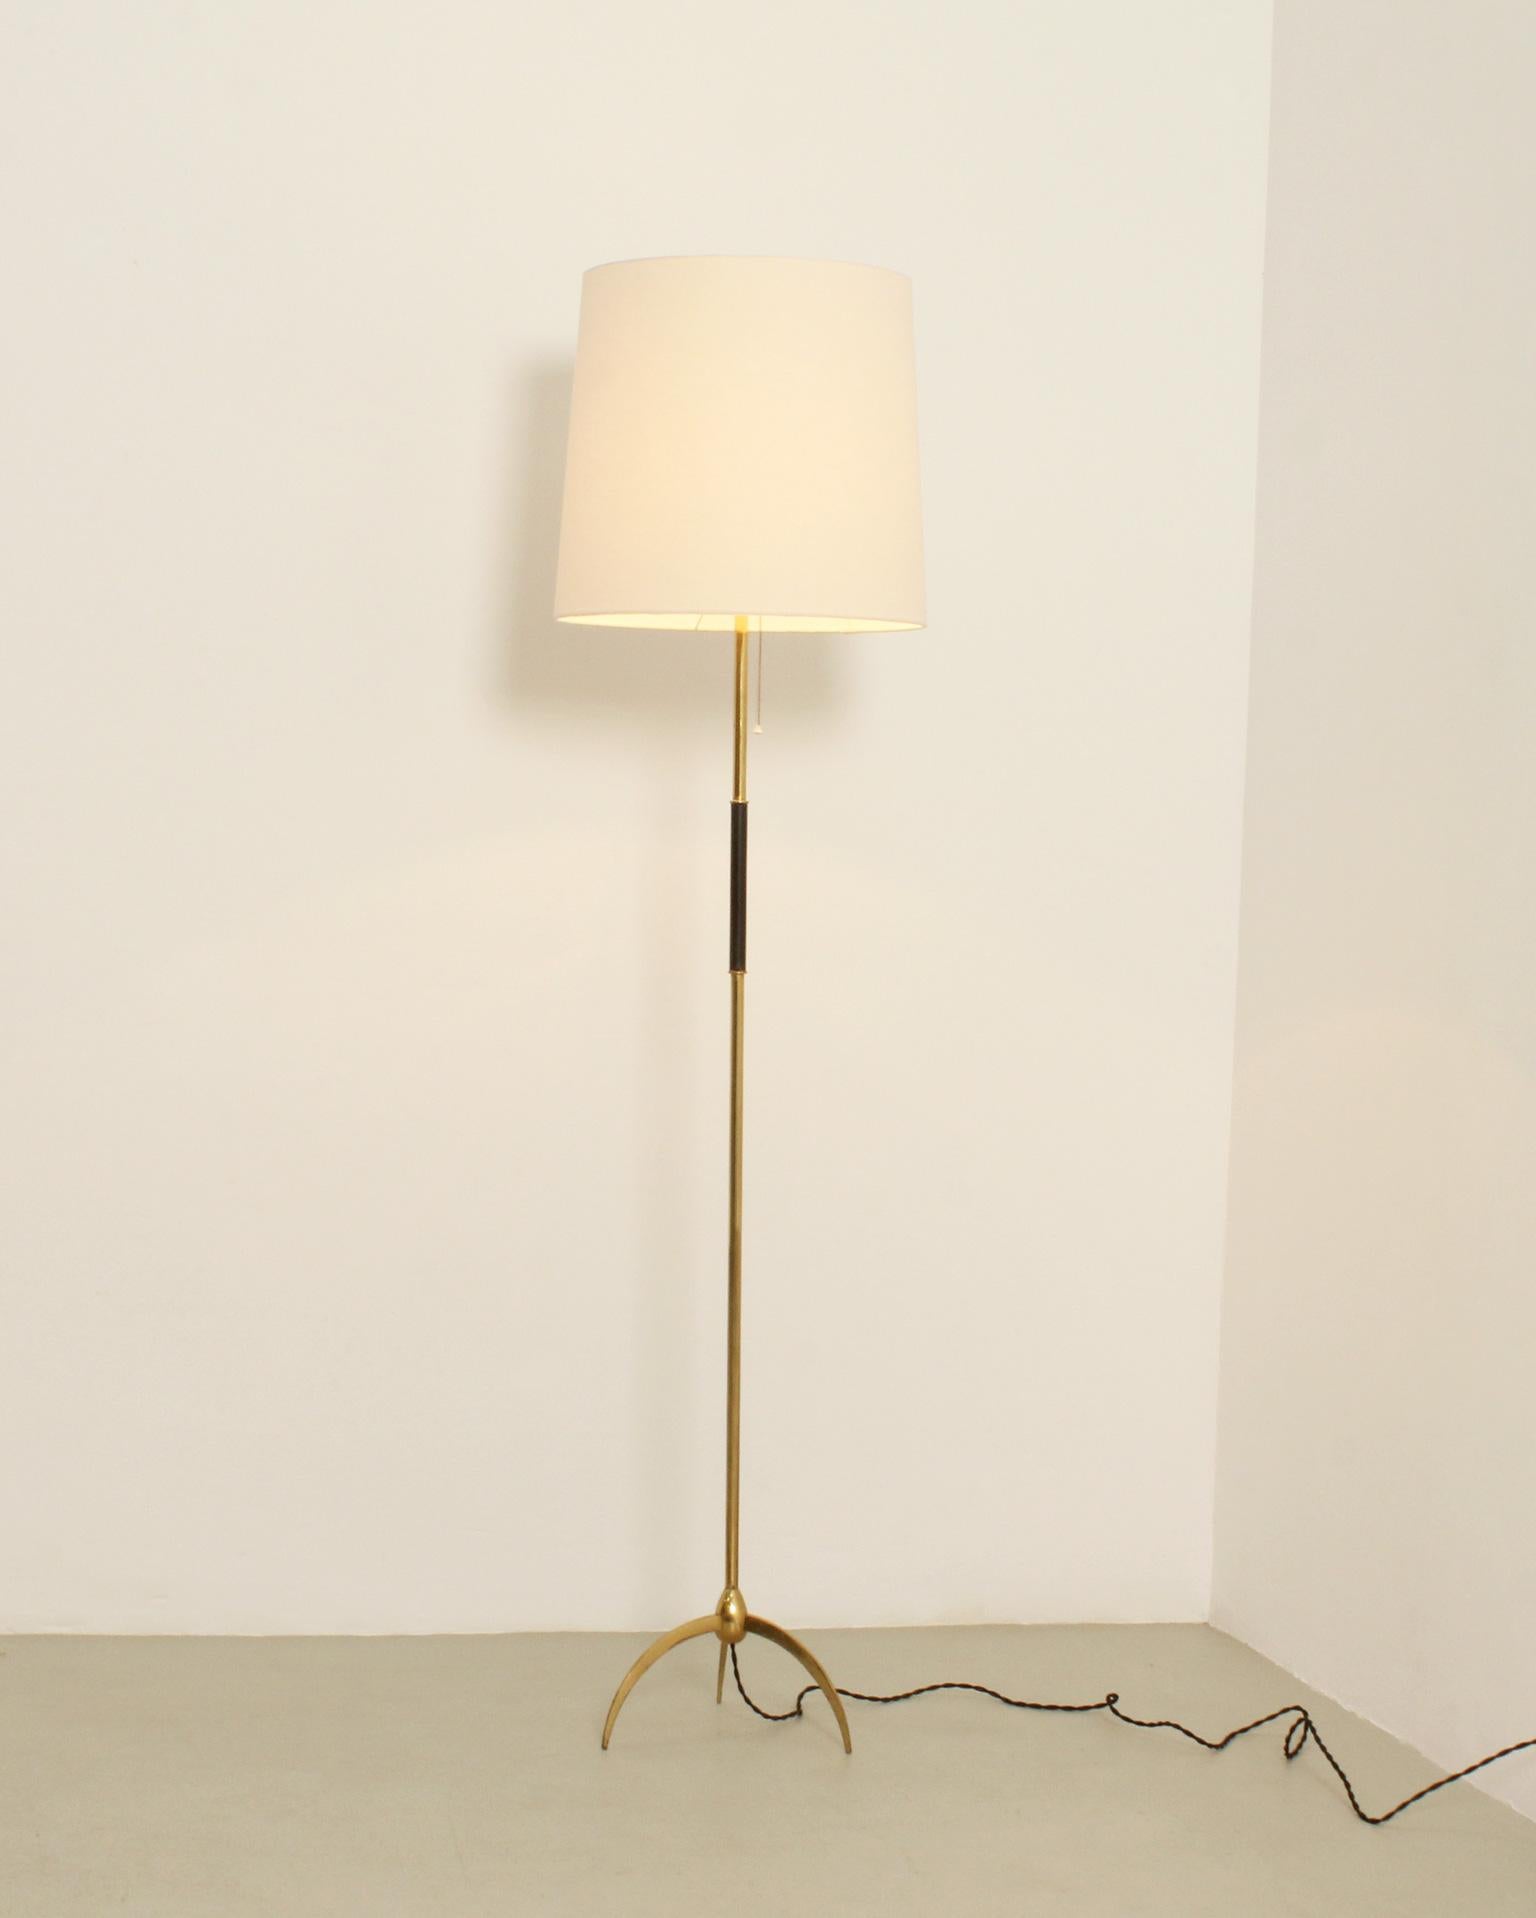 Brass Floor Lamp with Tripod Base, Spain, 1950's For Sale 3